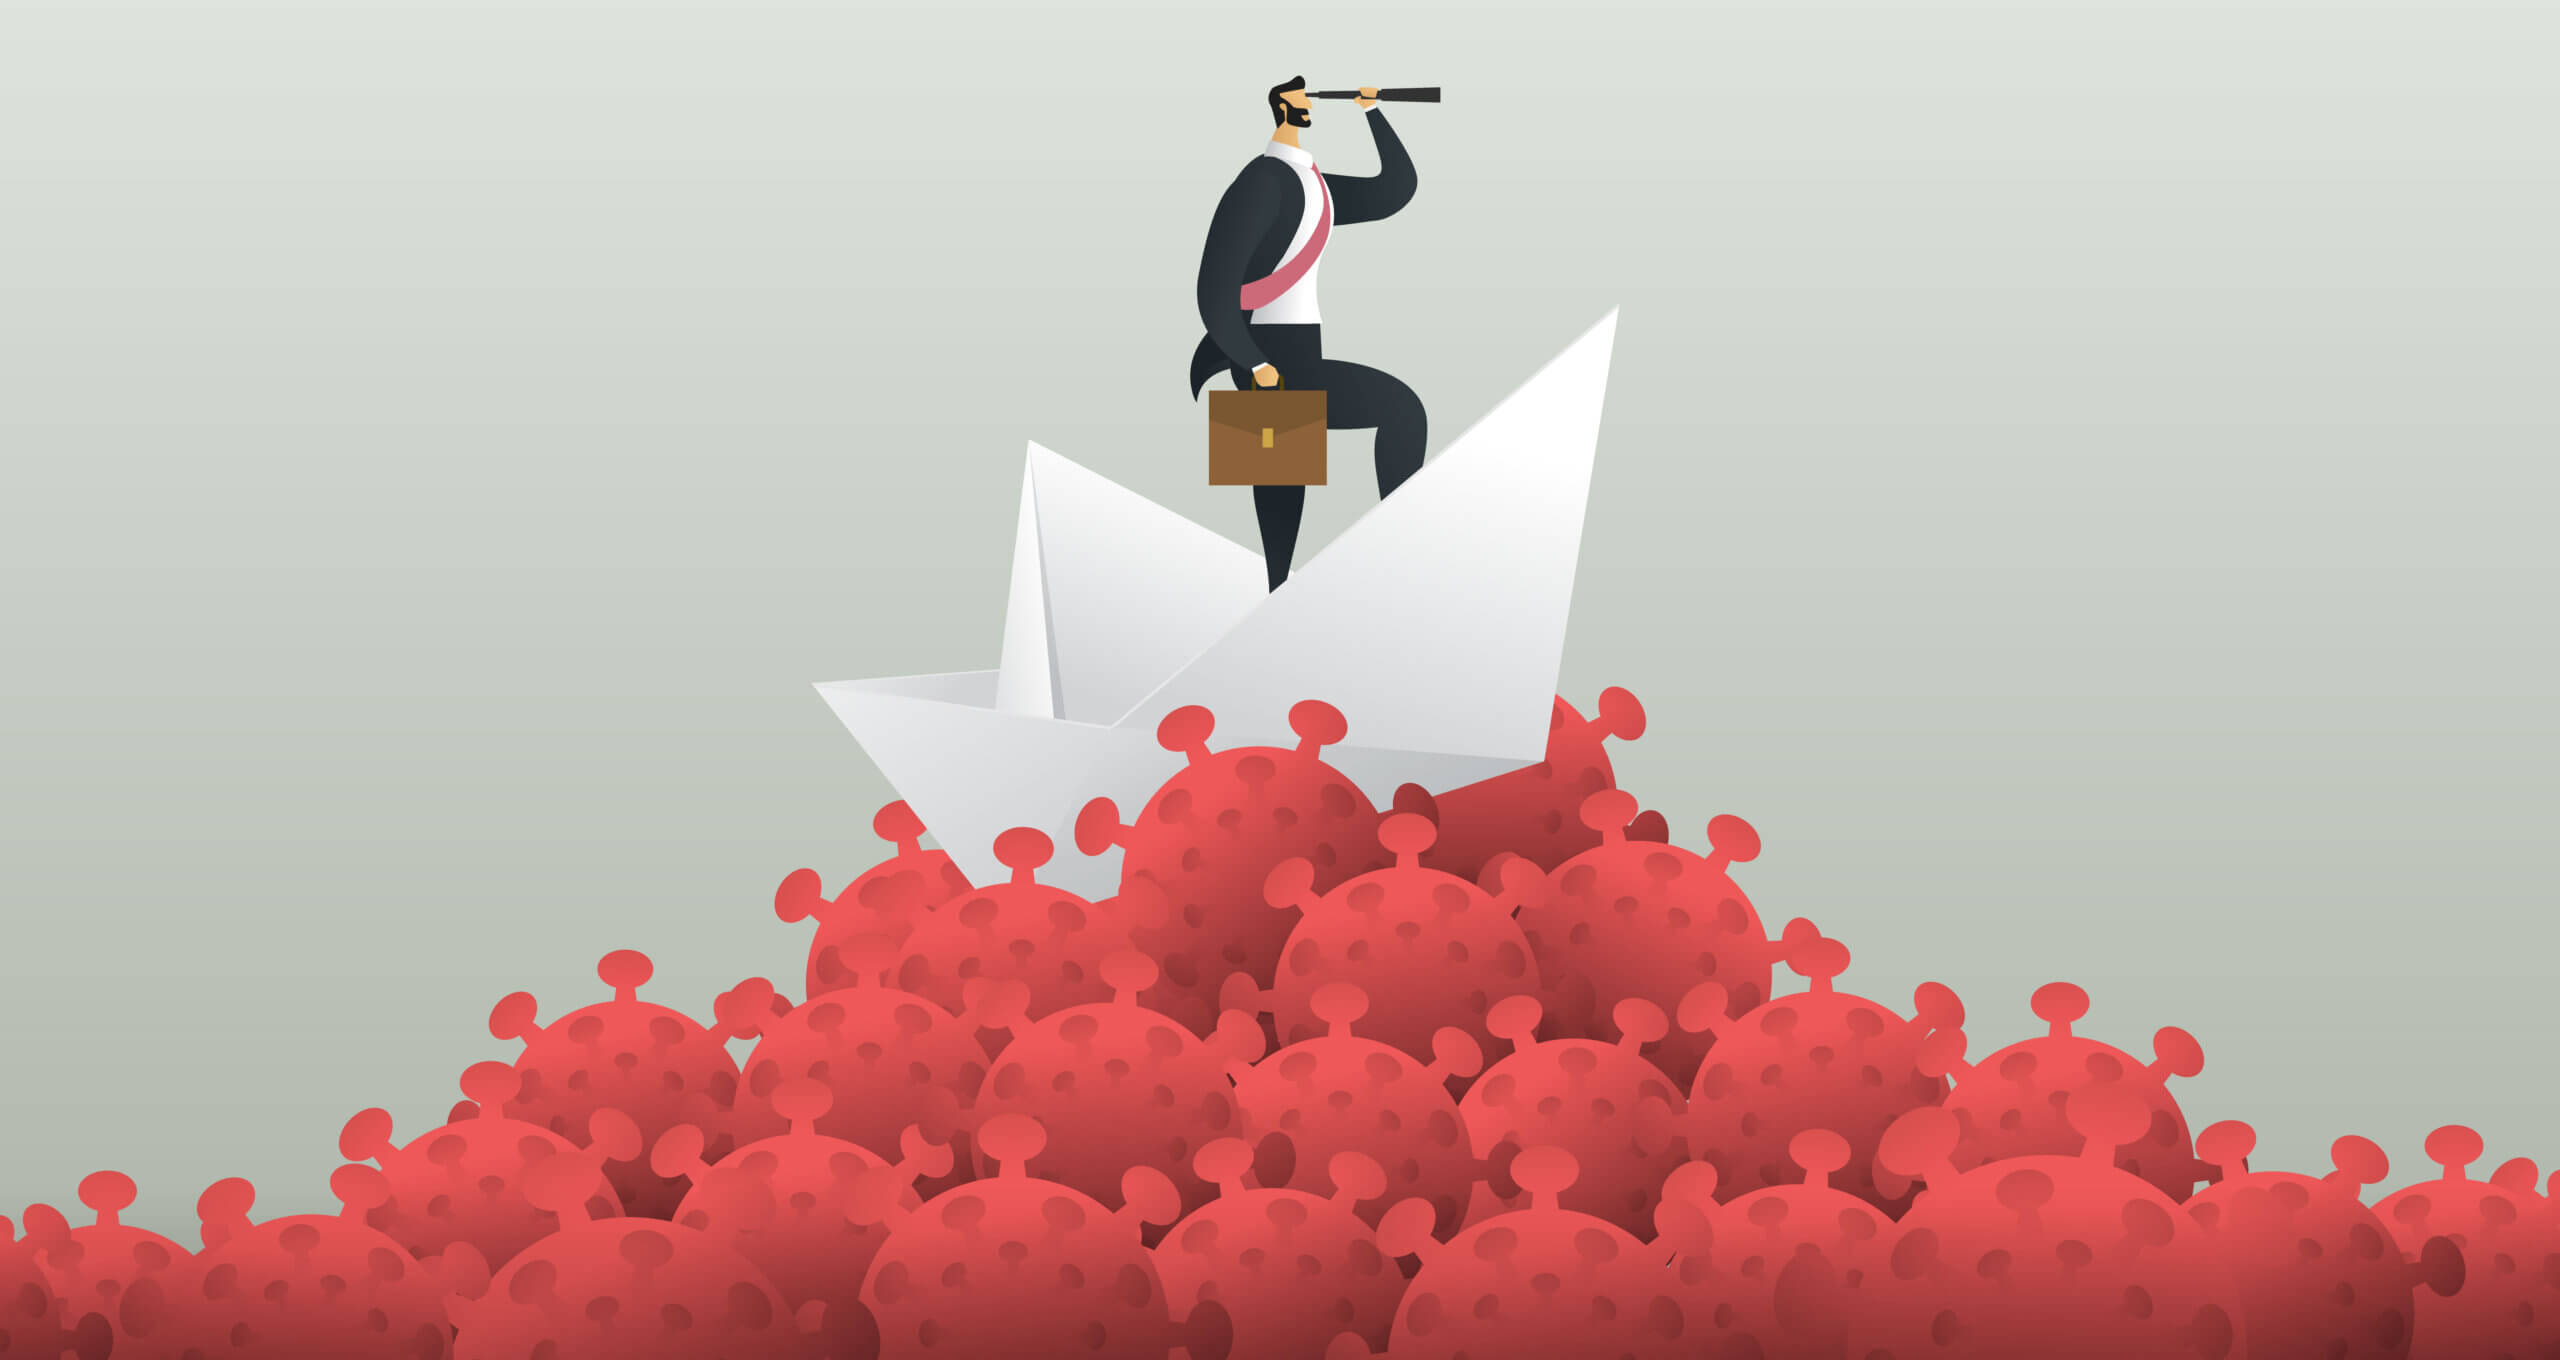 Illustration of a businessperson using a spyglass while sailing on a paper boat atop a sea of red coronavirus structures.